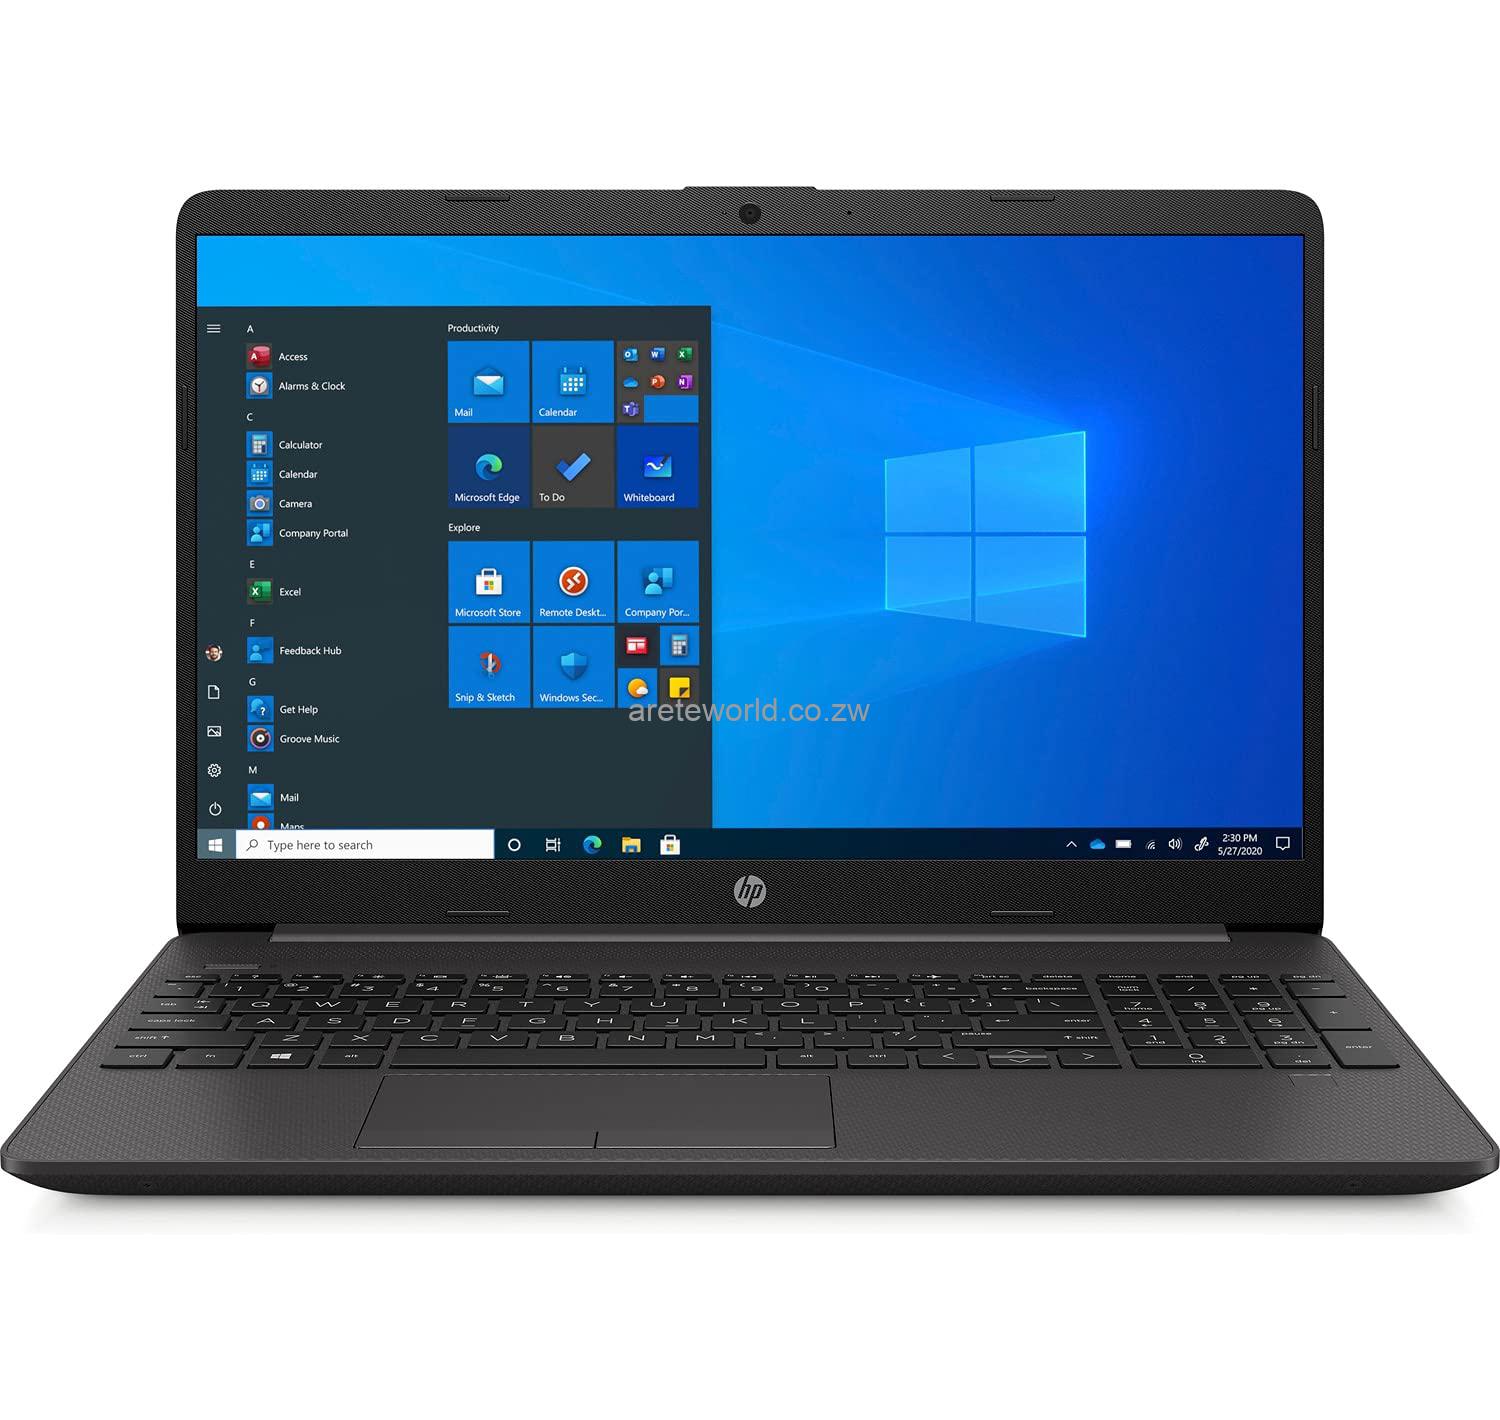 HP 25 G8 Laptop with Intel Core i3 10th Gen, 4GB RAM, and 1TB Hard Drive